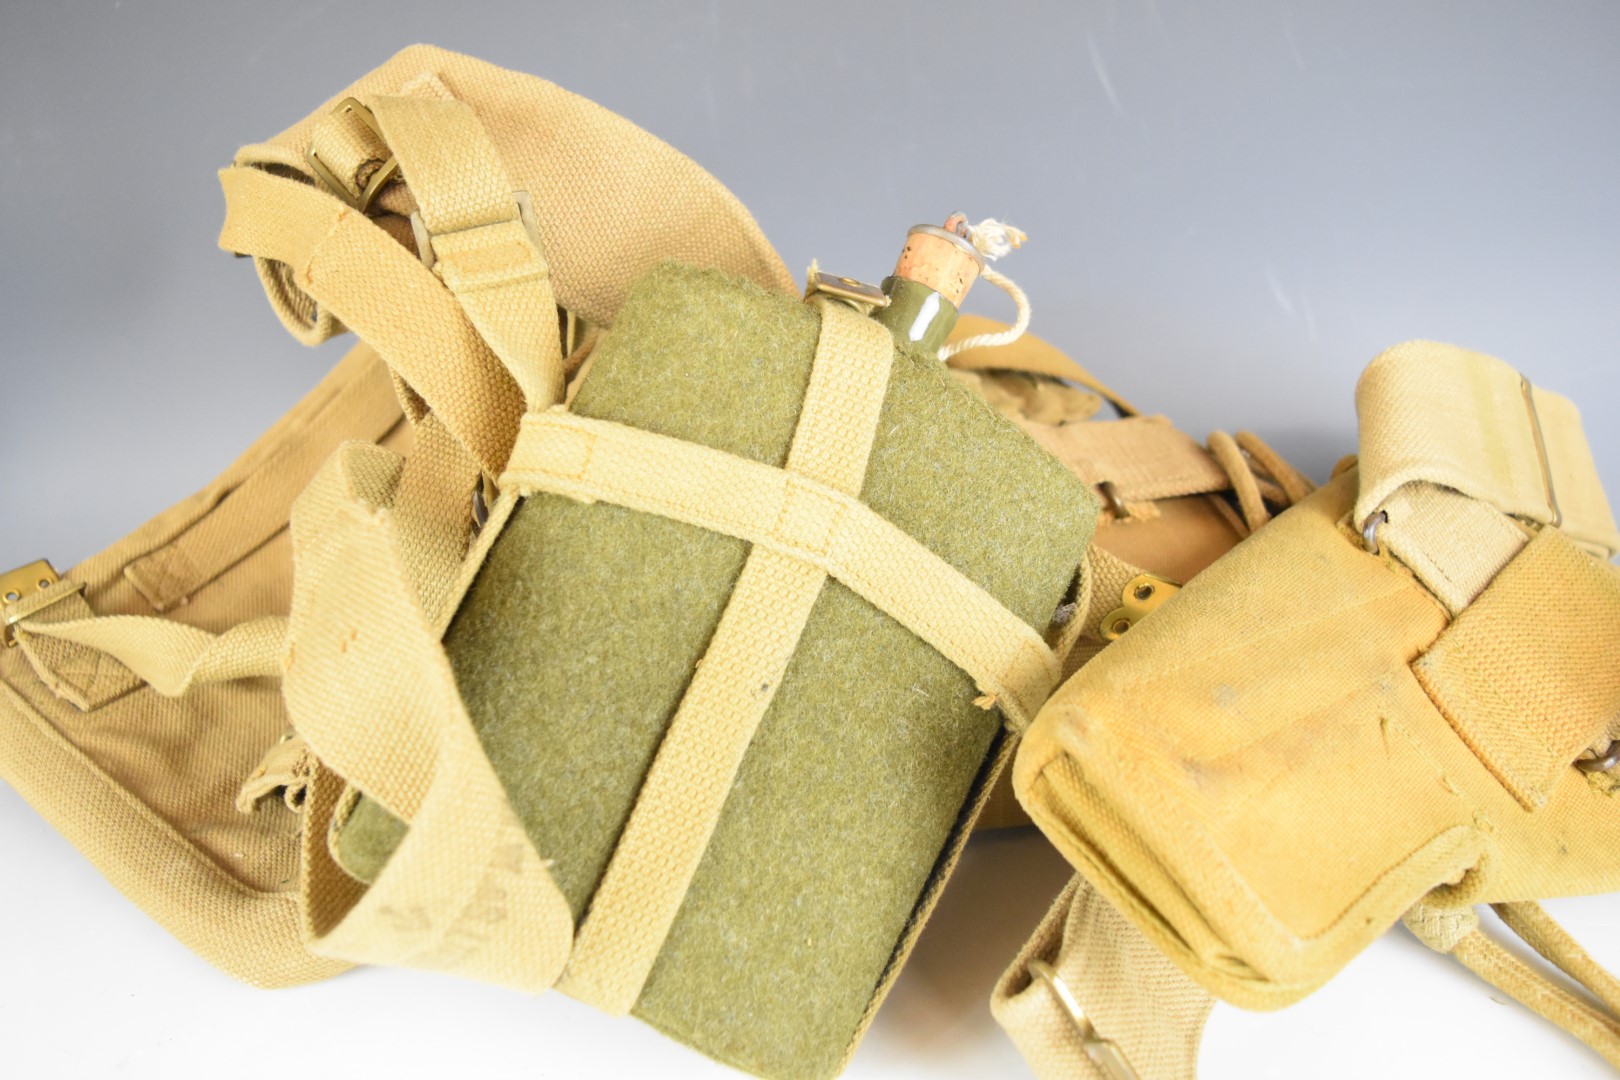 British WW2 webbing including ammunition pouches, belts, holsters, sling, lanyard and haversack, all - Image 11 of 11